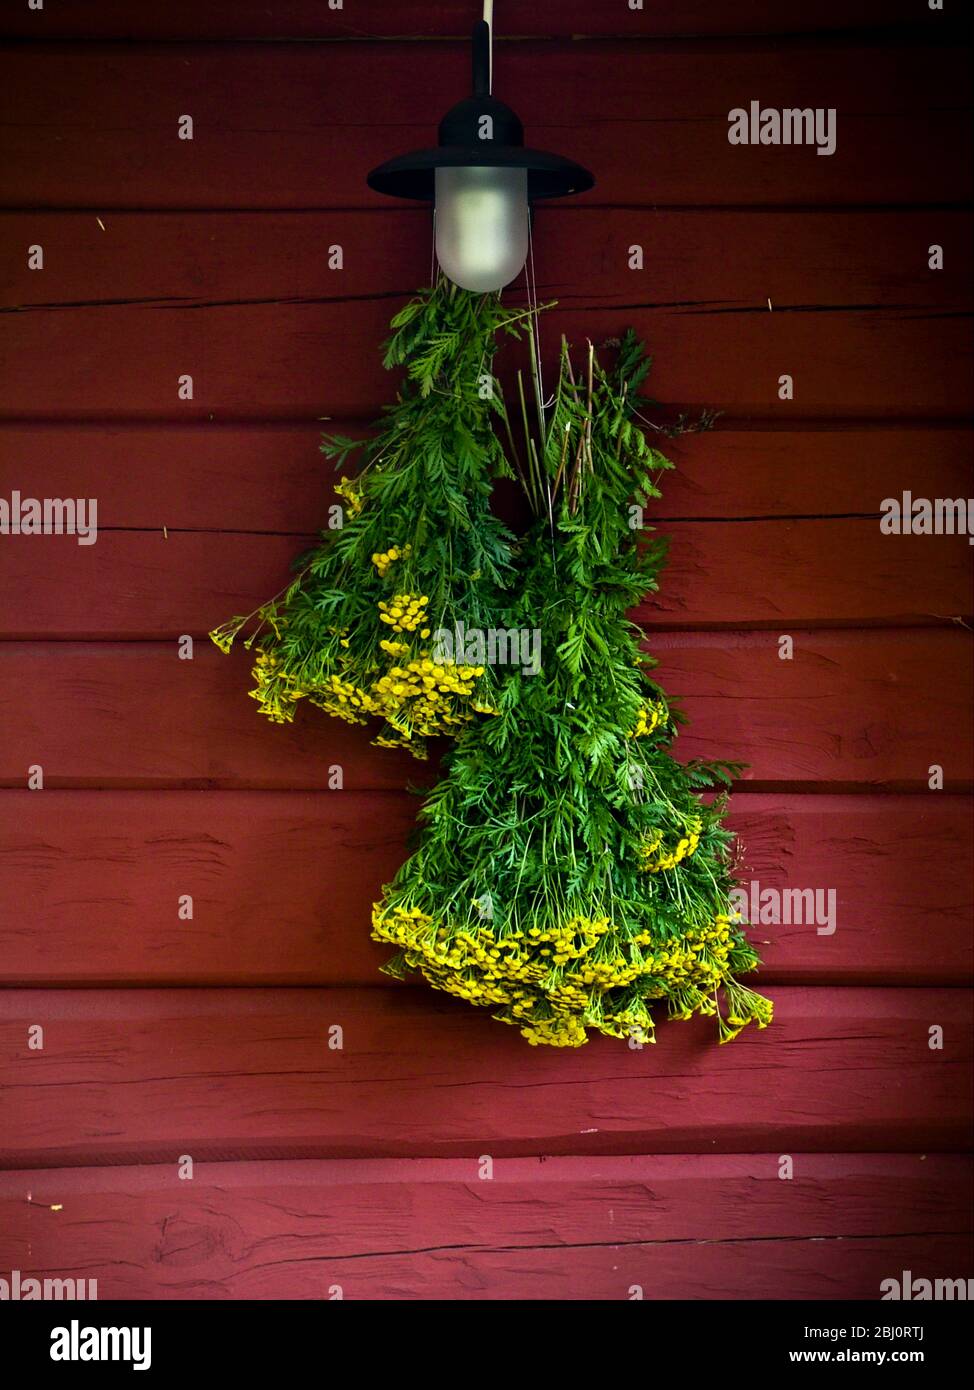 Bunch of yellow yarrow hanging on red wall of falu red painted wooden summer house, Sweden. - Stock Photo